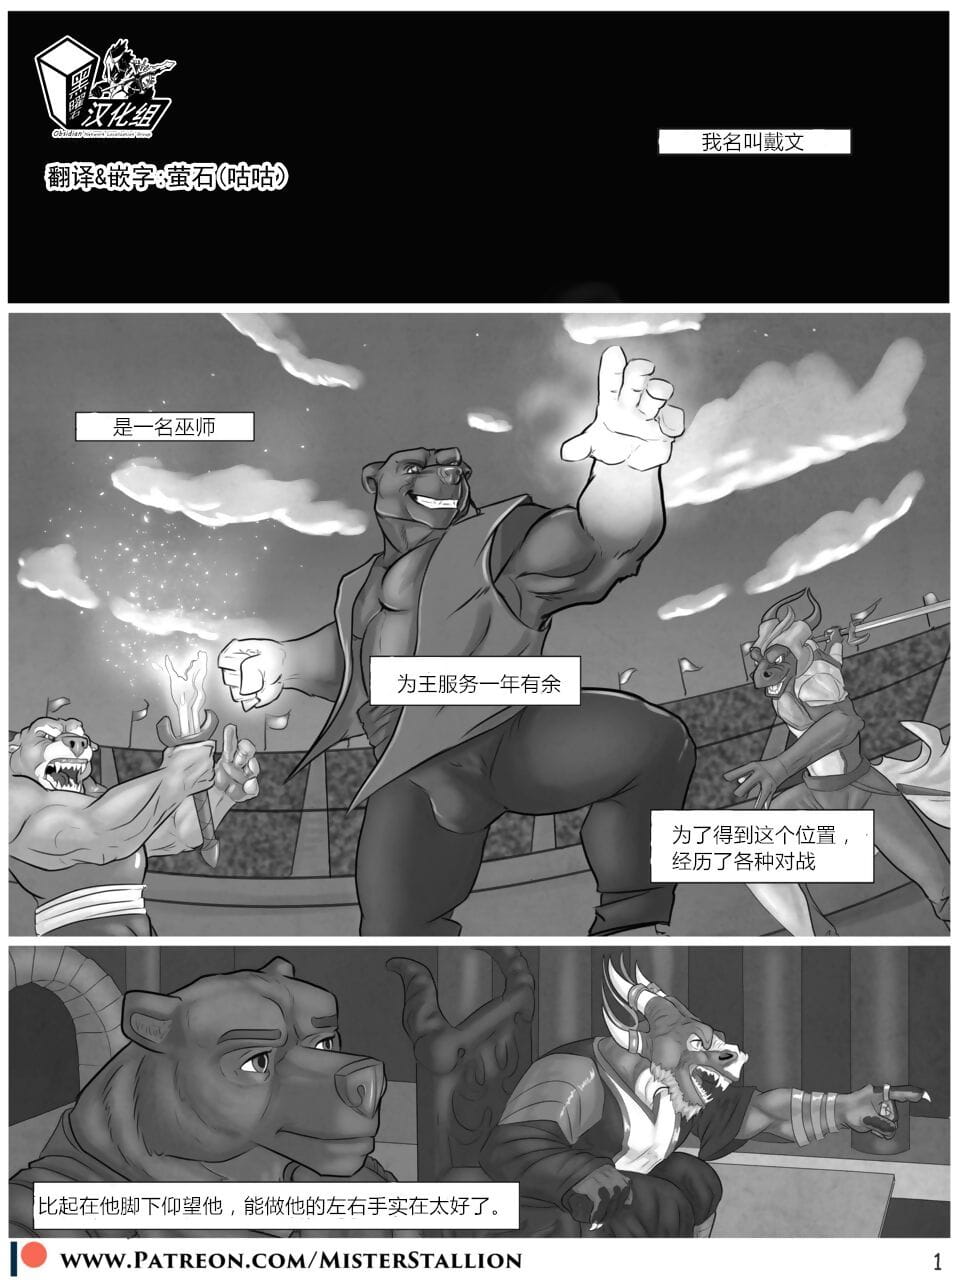 Forest Fires - 林中欲火 page 1